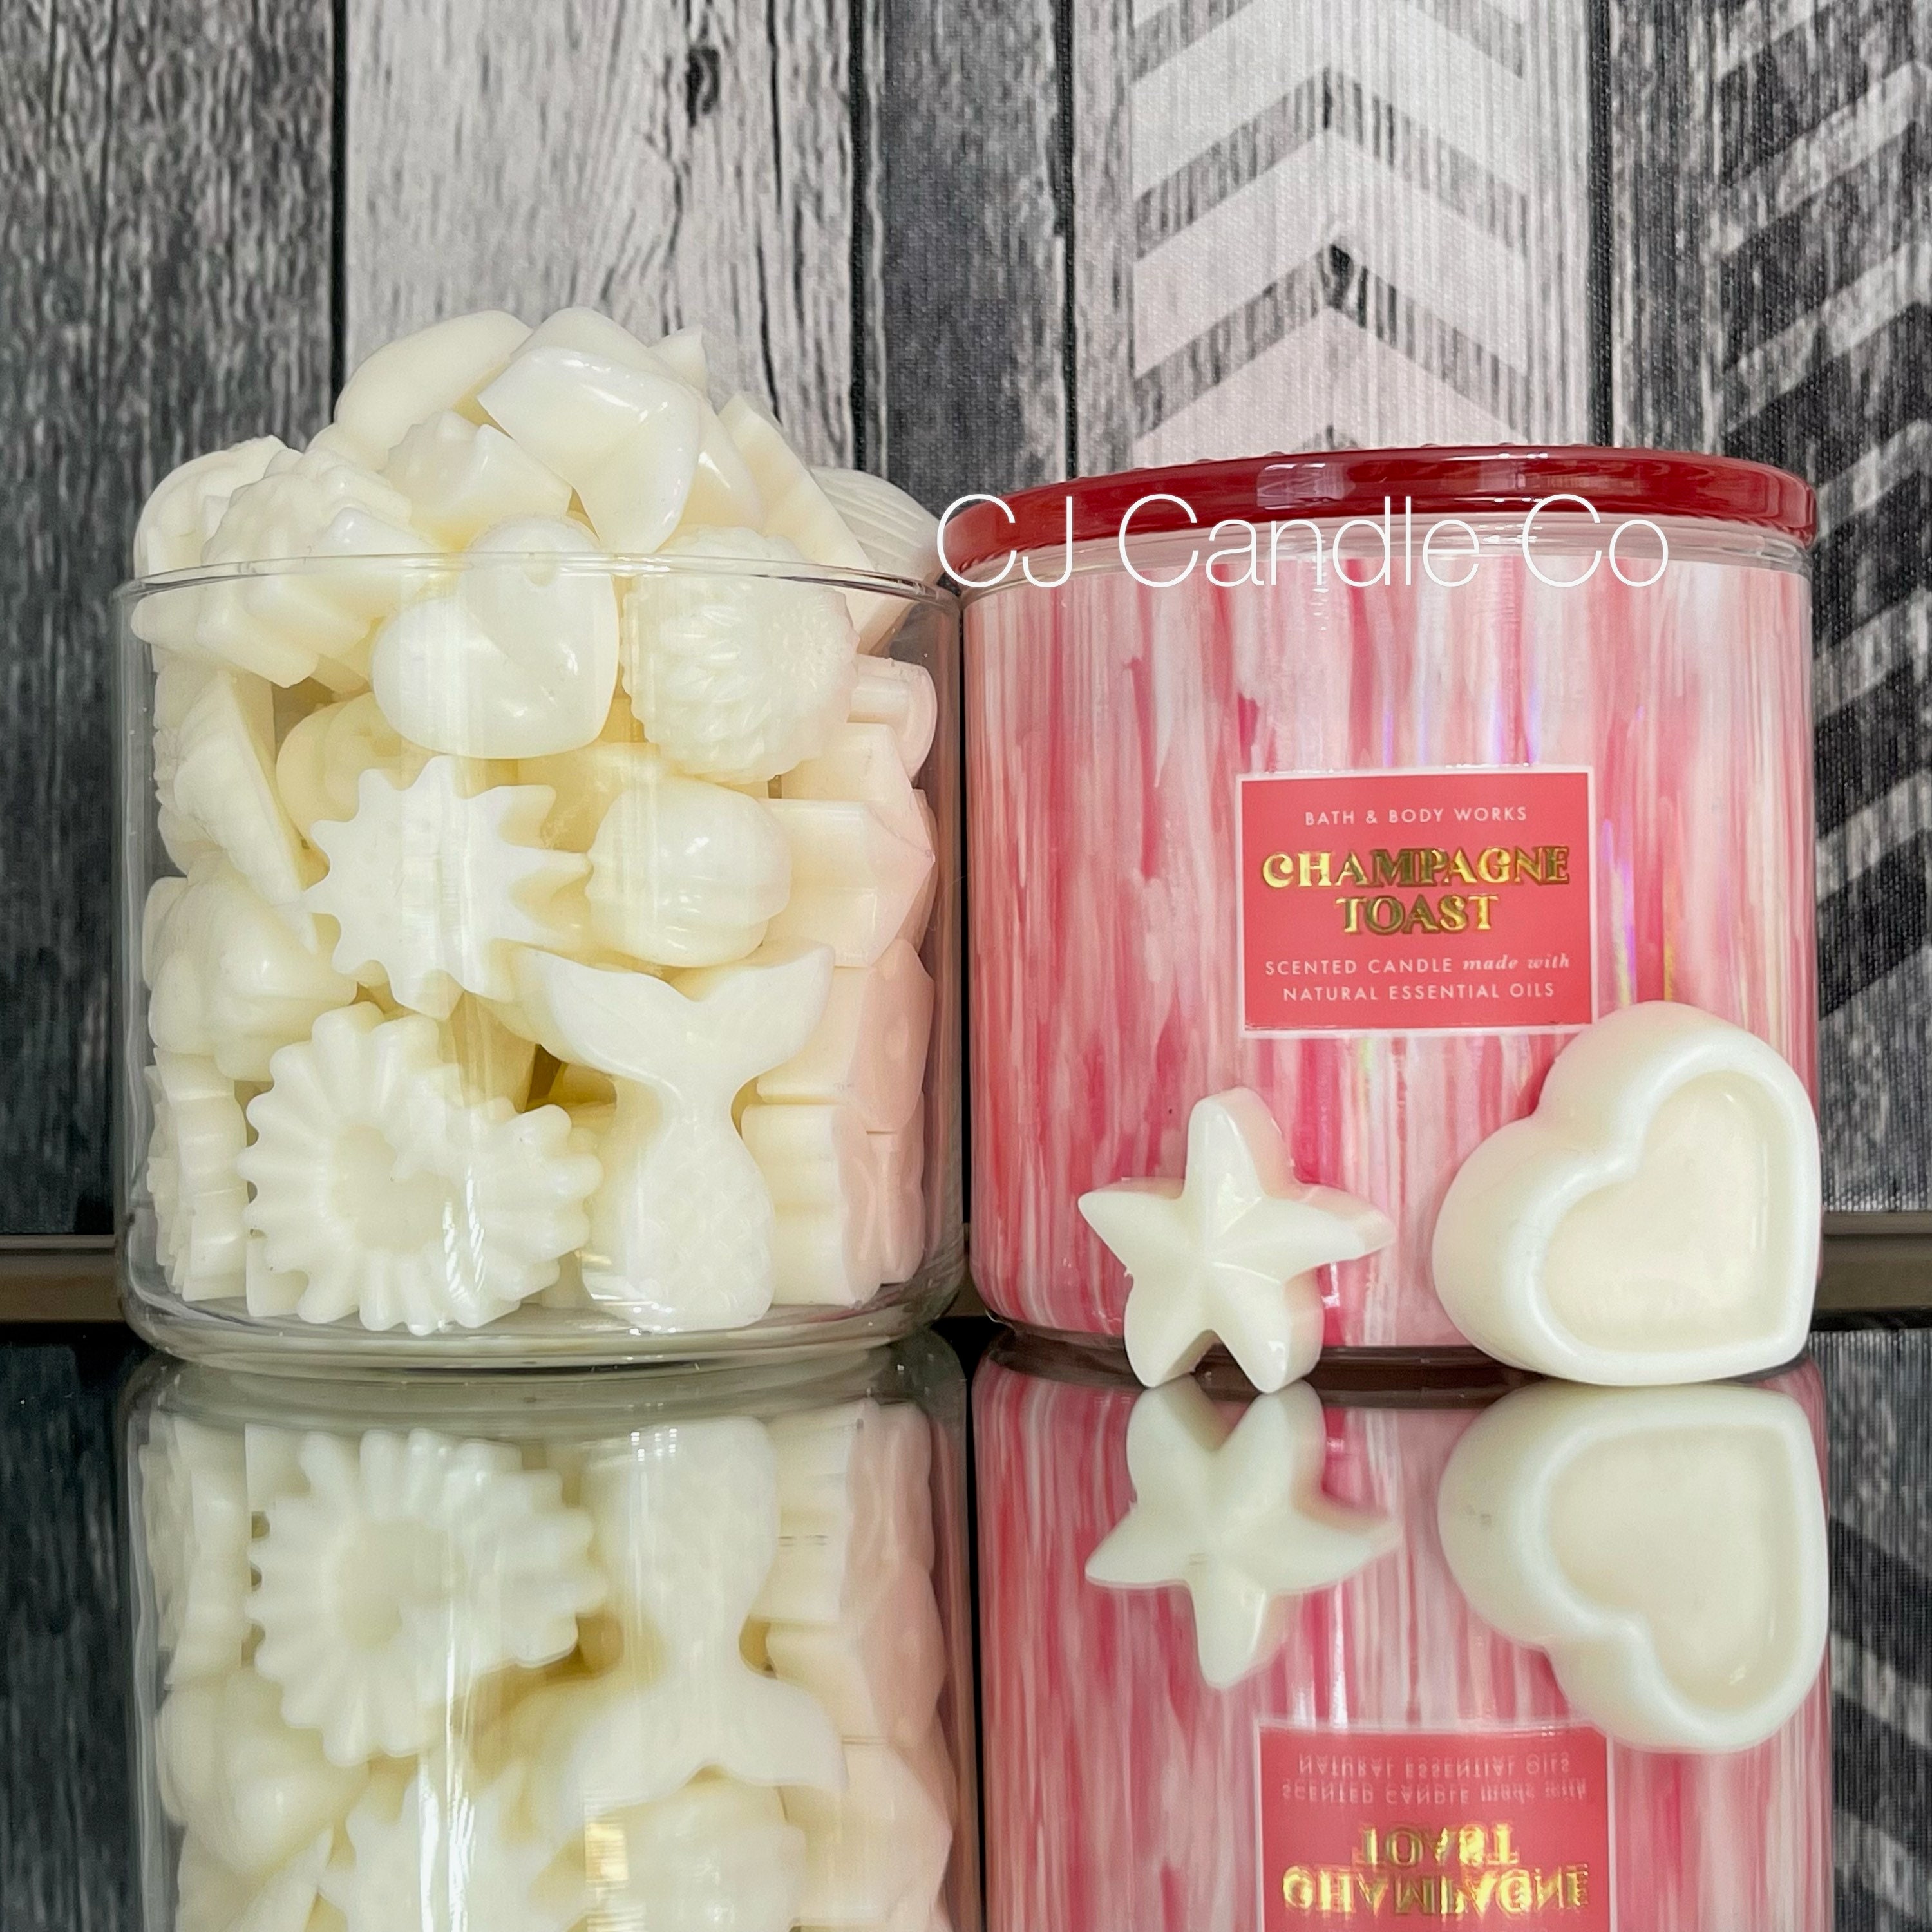 Champagne Toast Candle Review